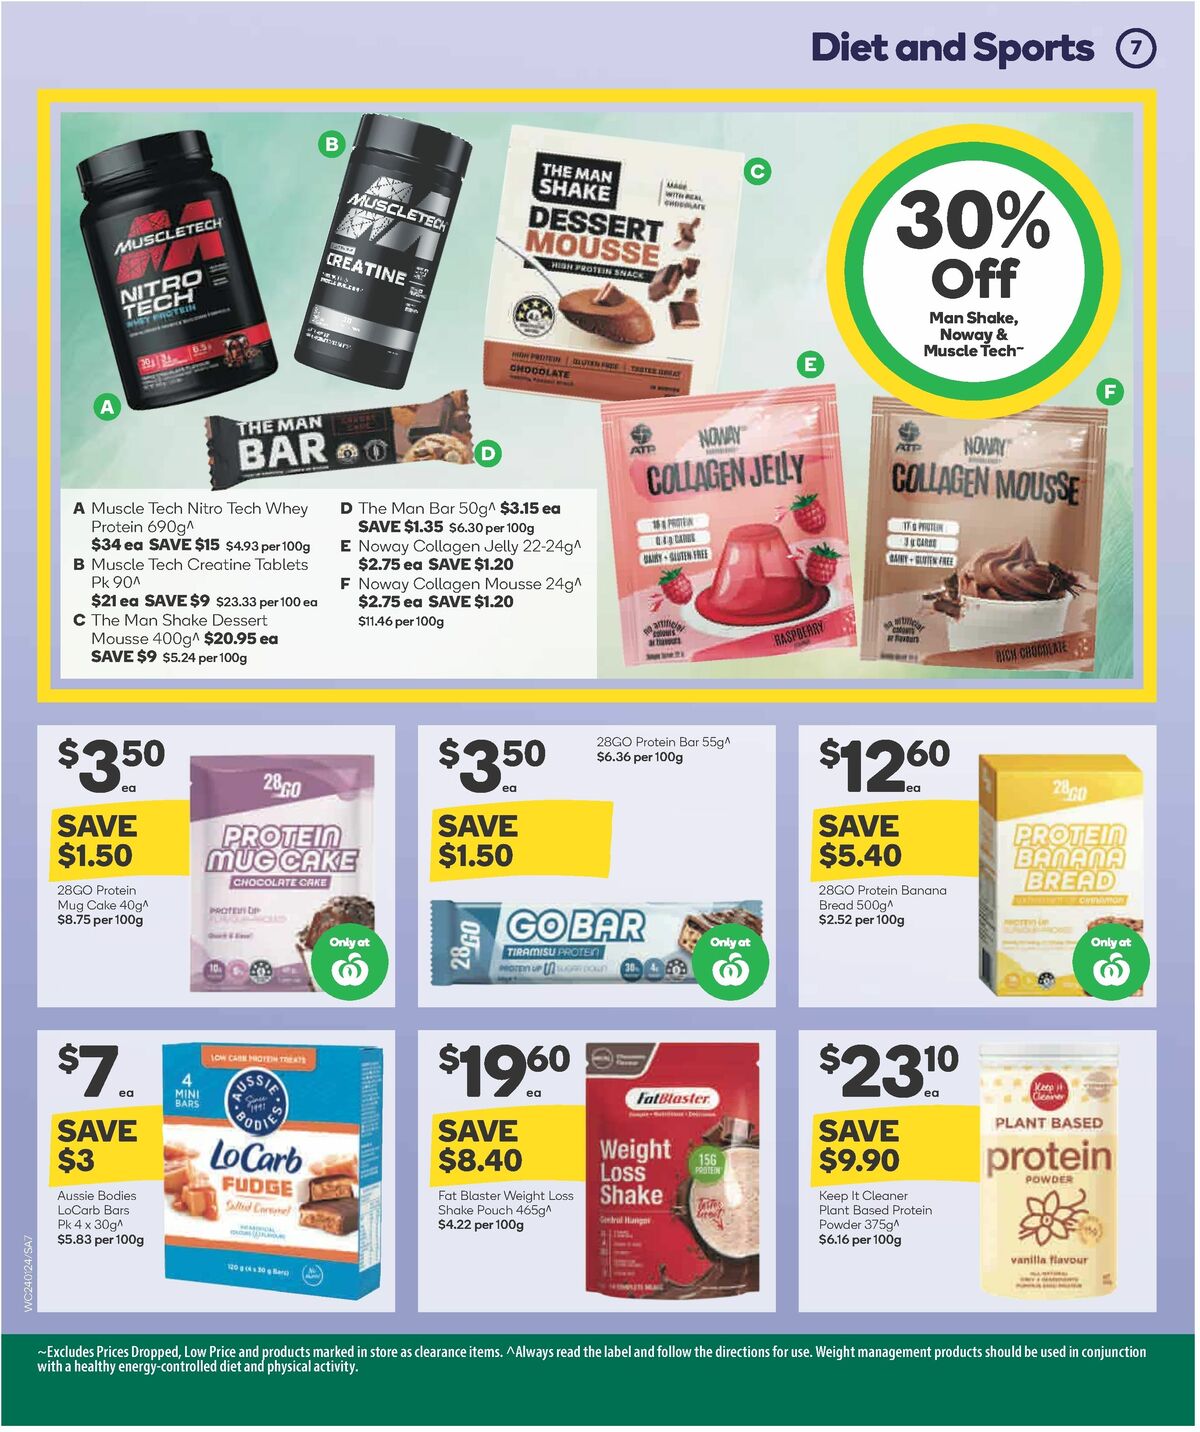 Woolworths Spring Health & Beauty Catalogues from 24 January